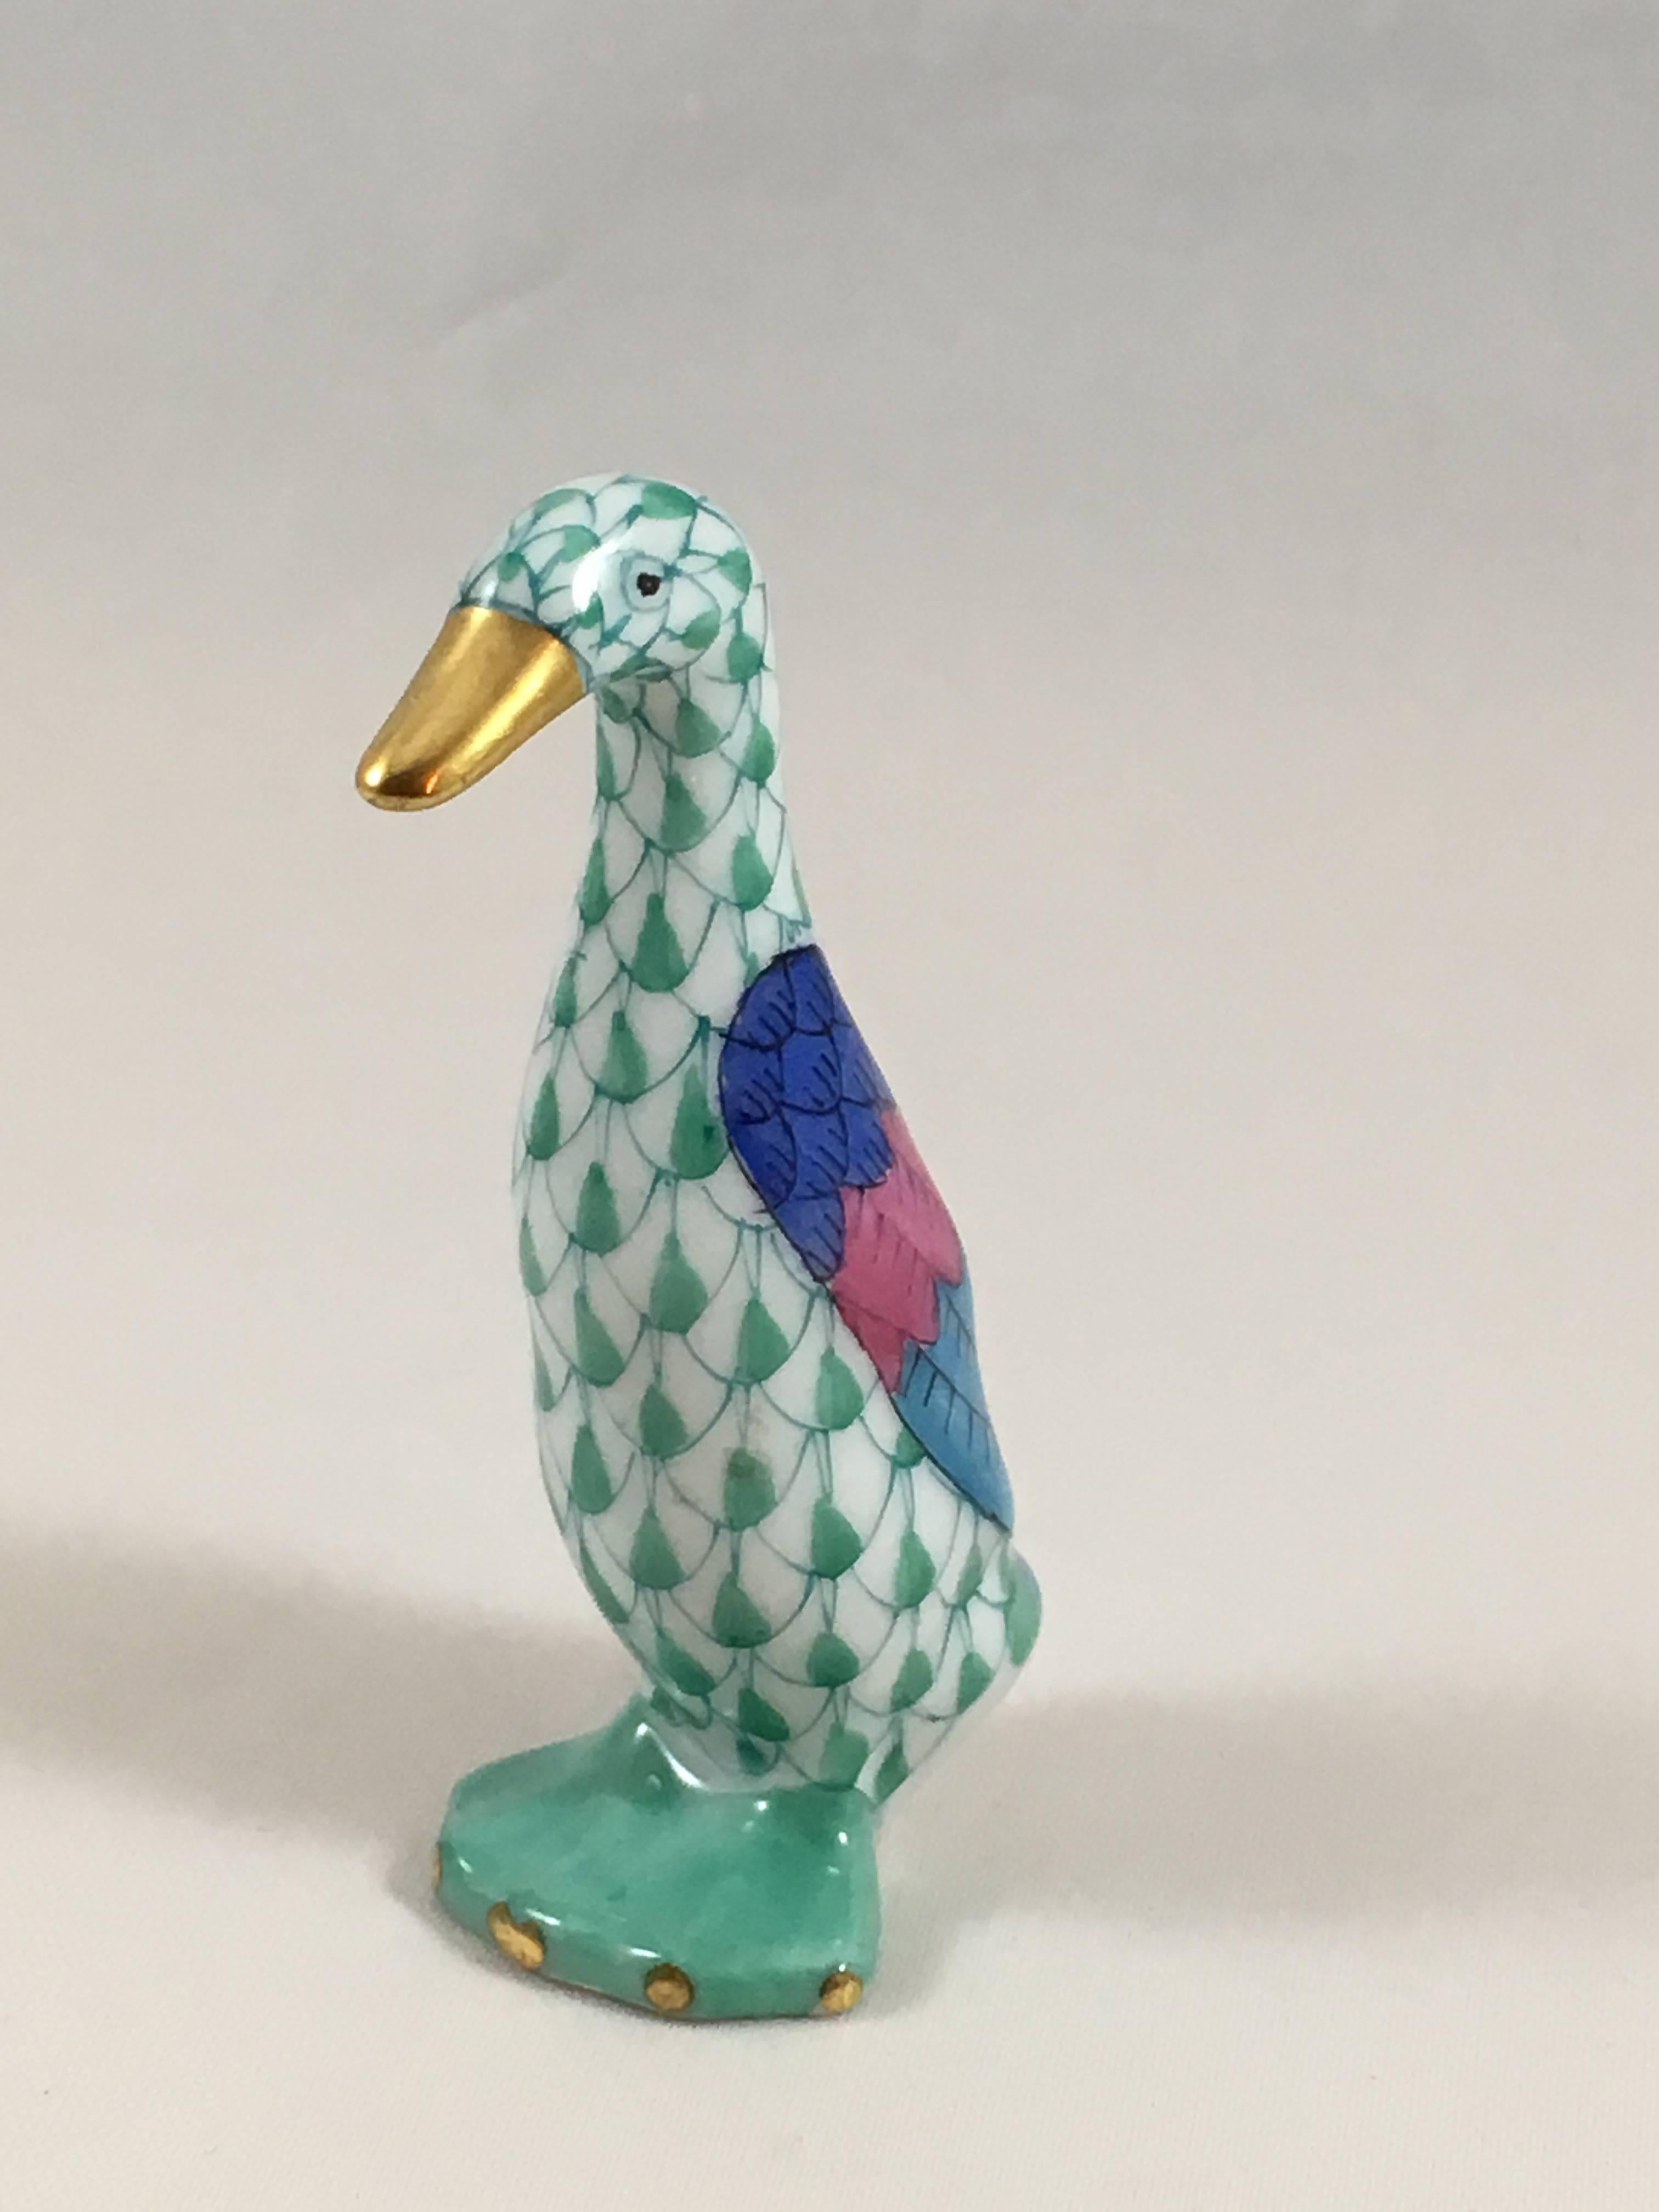 Porcelain Herend of Hungary goose figurine handmade and hand painted in Herend's signature fishnet pattern in green and accented with 24k gold. It measures 2 1/2 inches tall x 1